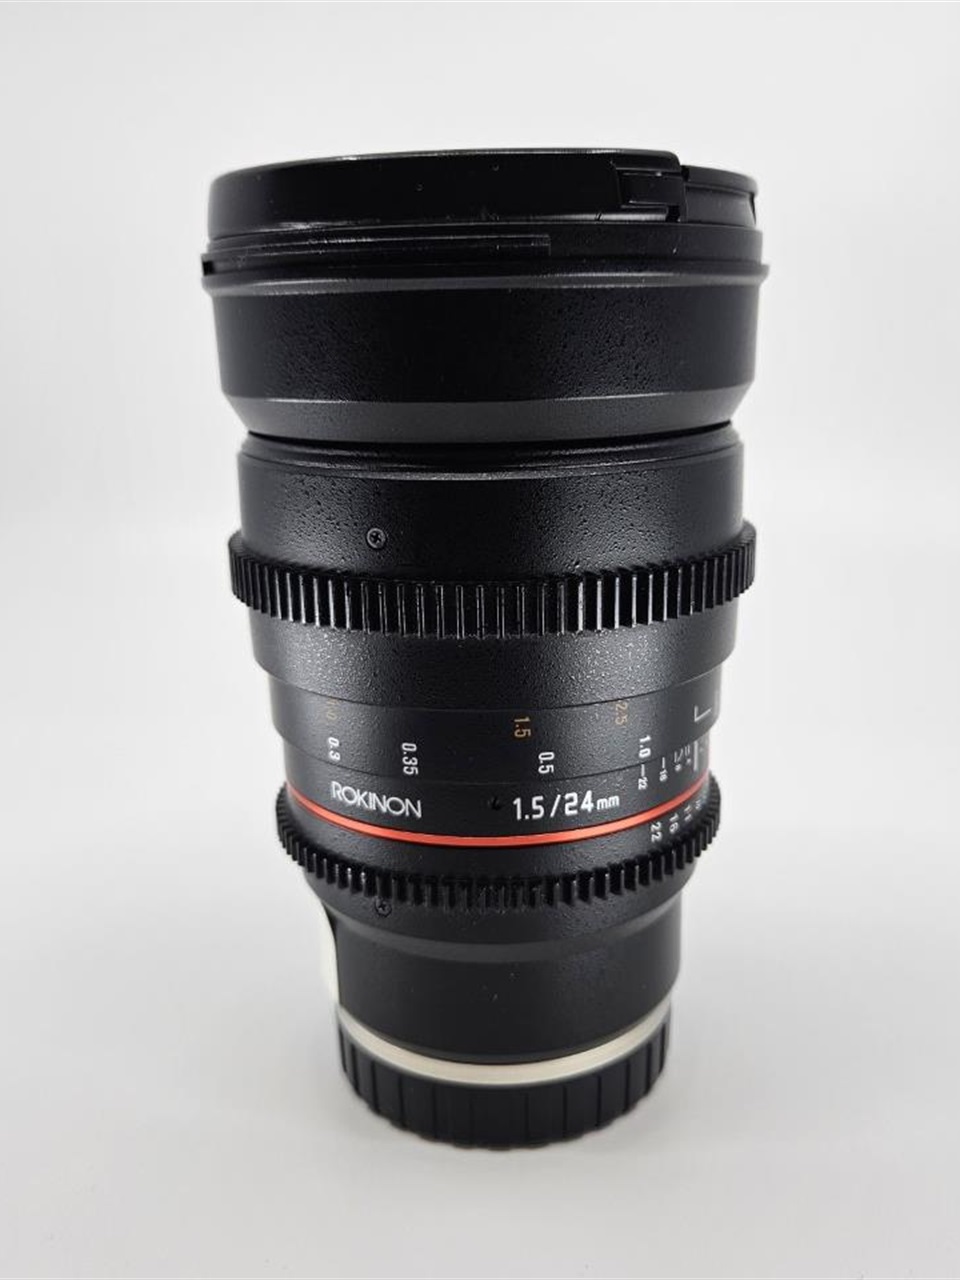 24mm lens, not attached to camera